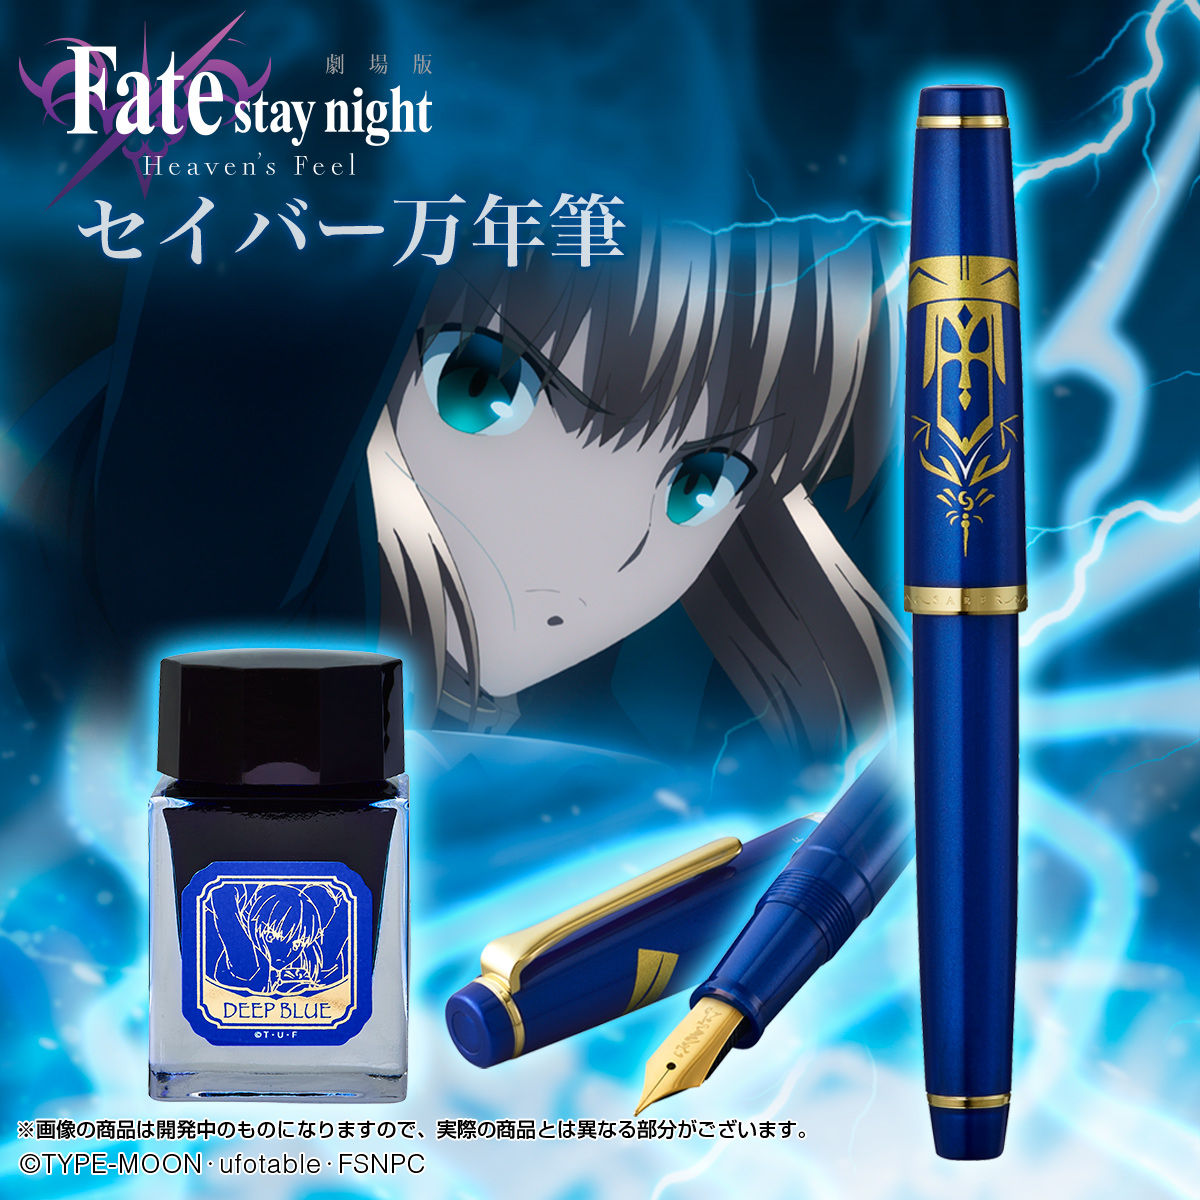 Fate stay night『セイバー』